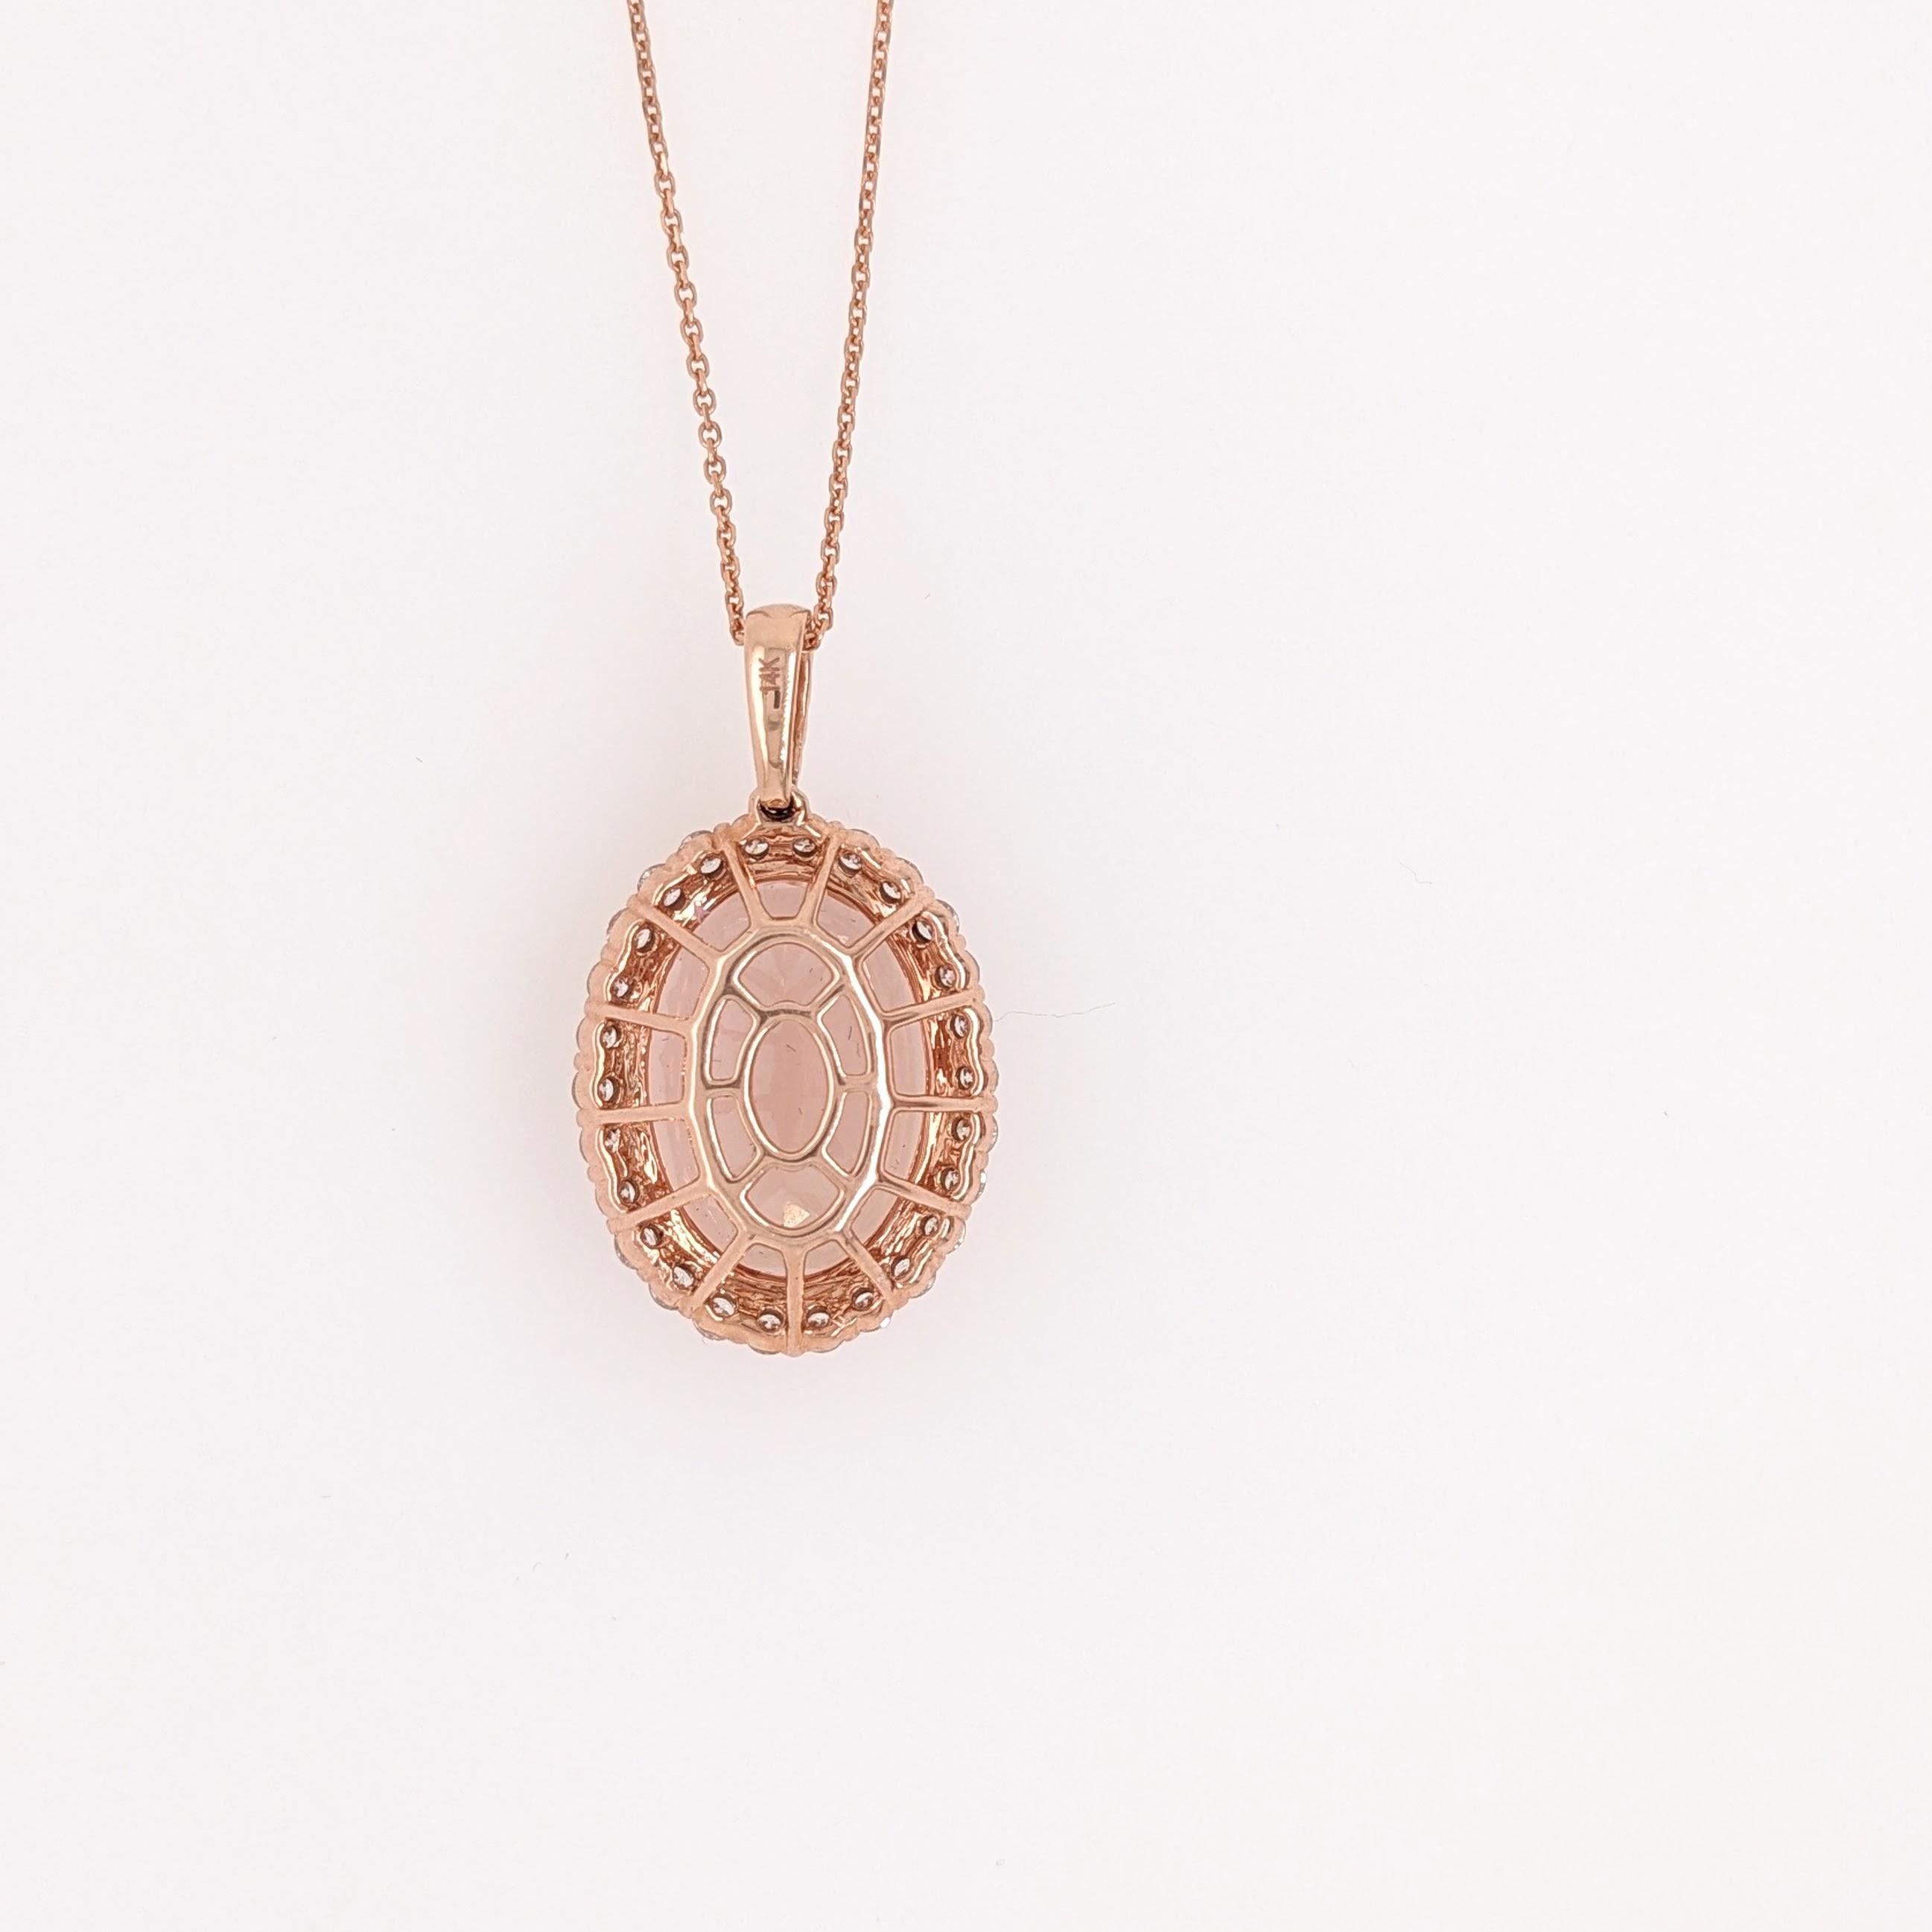 This huge 12.58 carat Morganite looks stunning in this pendant with a classic halo design and a diamond studded bail. 14k rose gold makes this piece extra unique and extra pink! The prong setting shows off this beautiful oval morganite ensuring